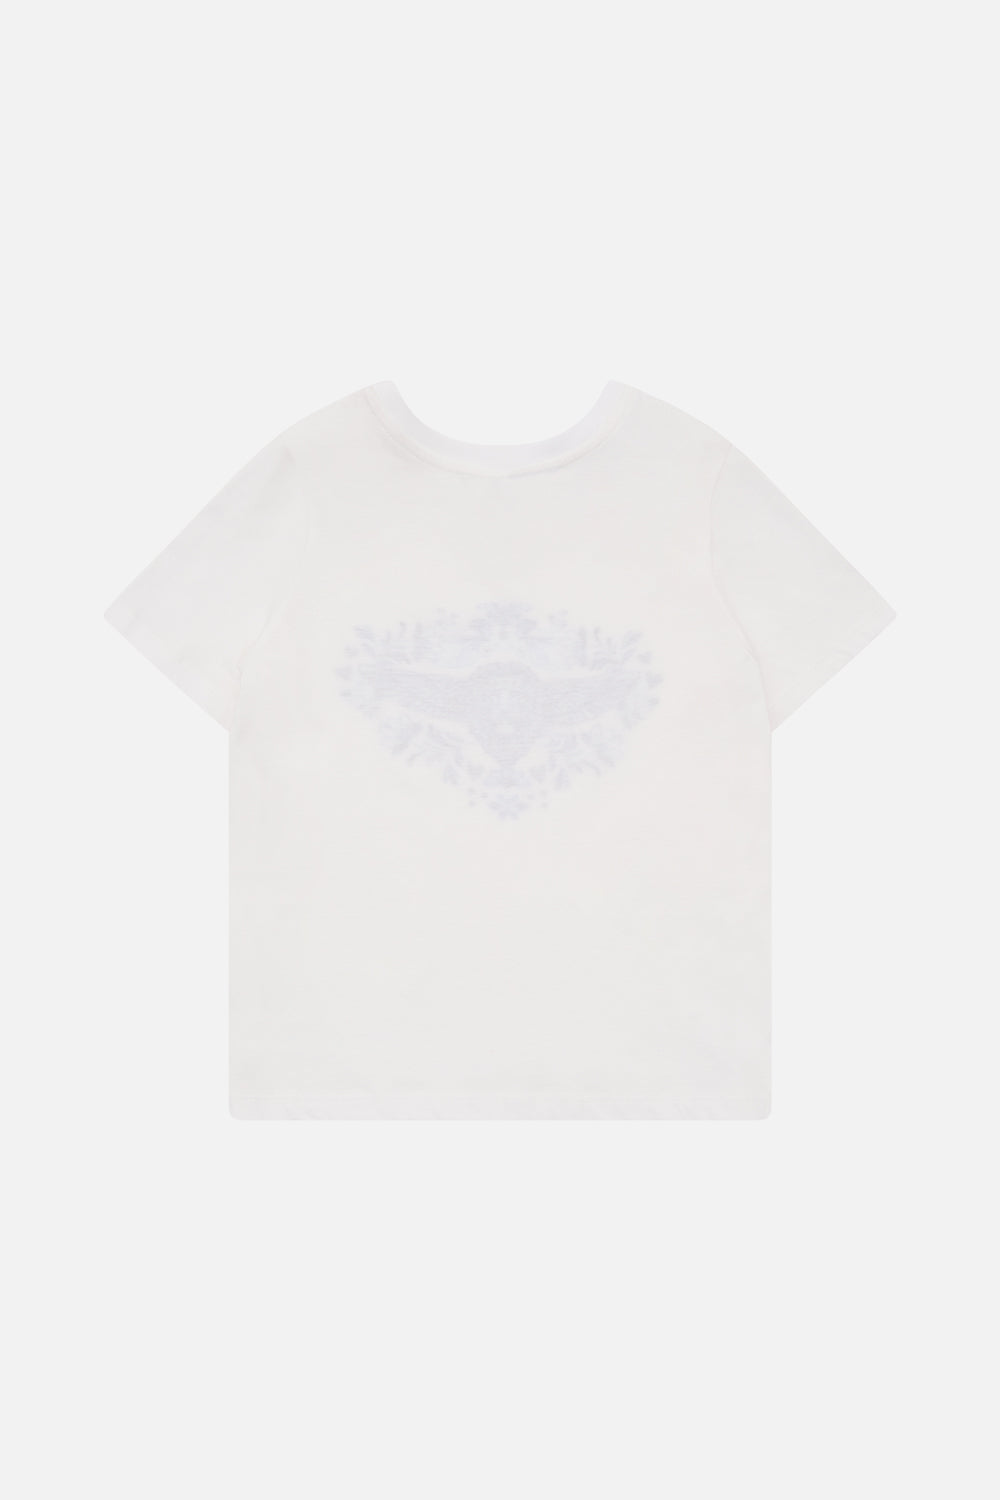 Front product view of Milla by CAMILLA boys t shirt in Glaze and Graze print